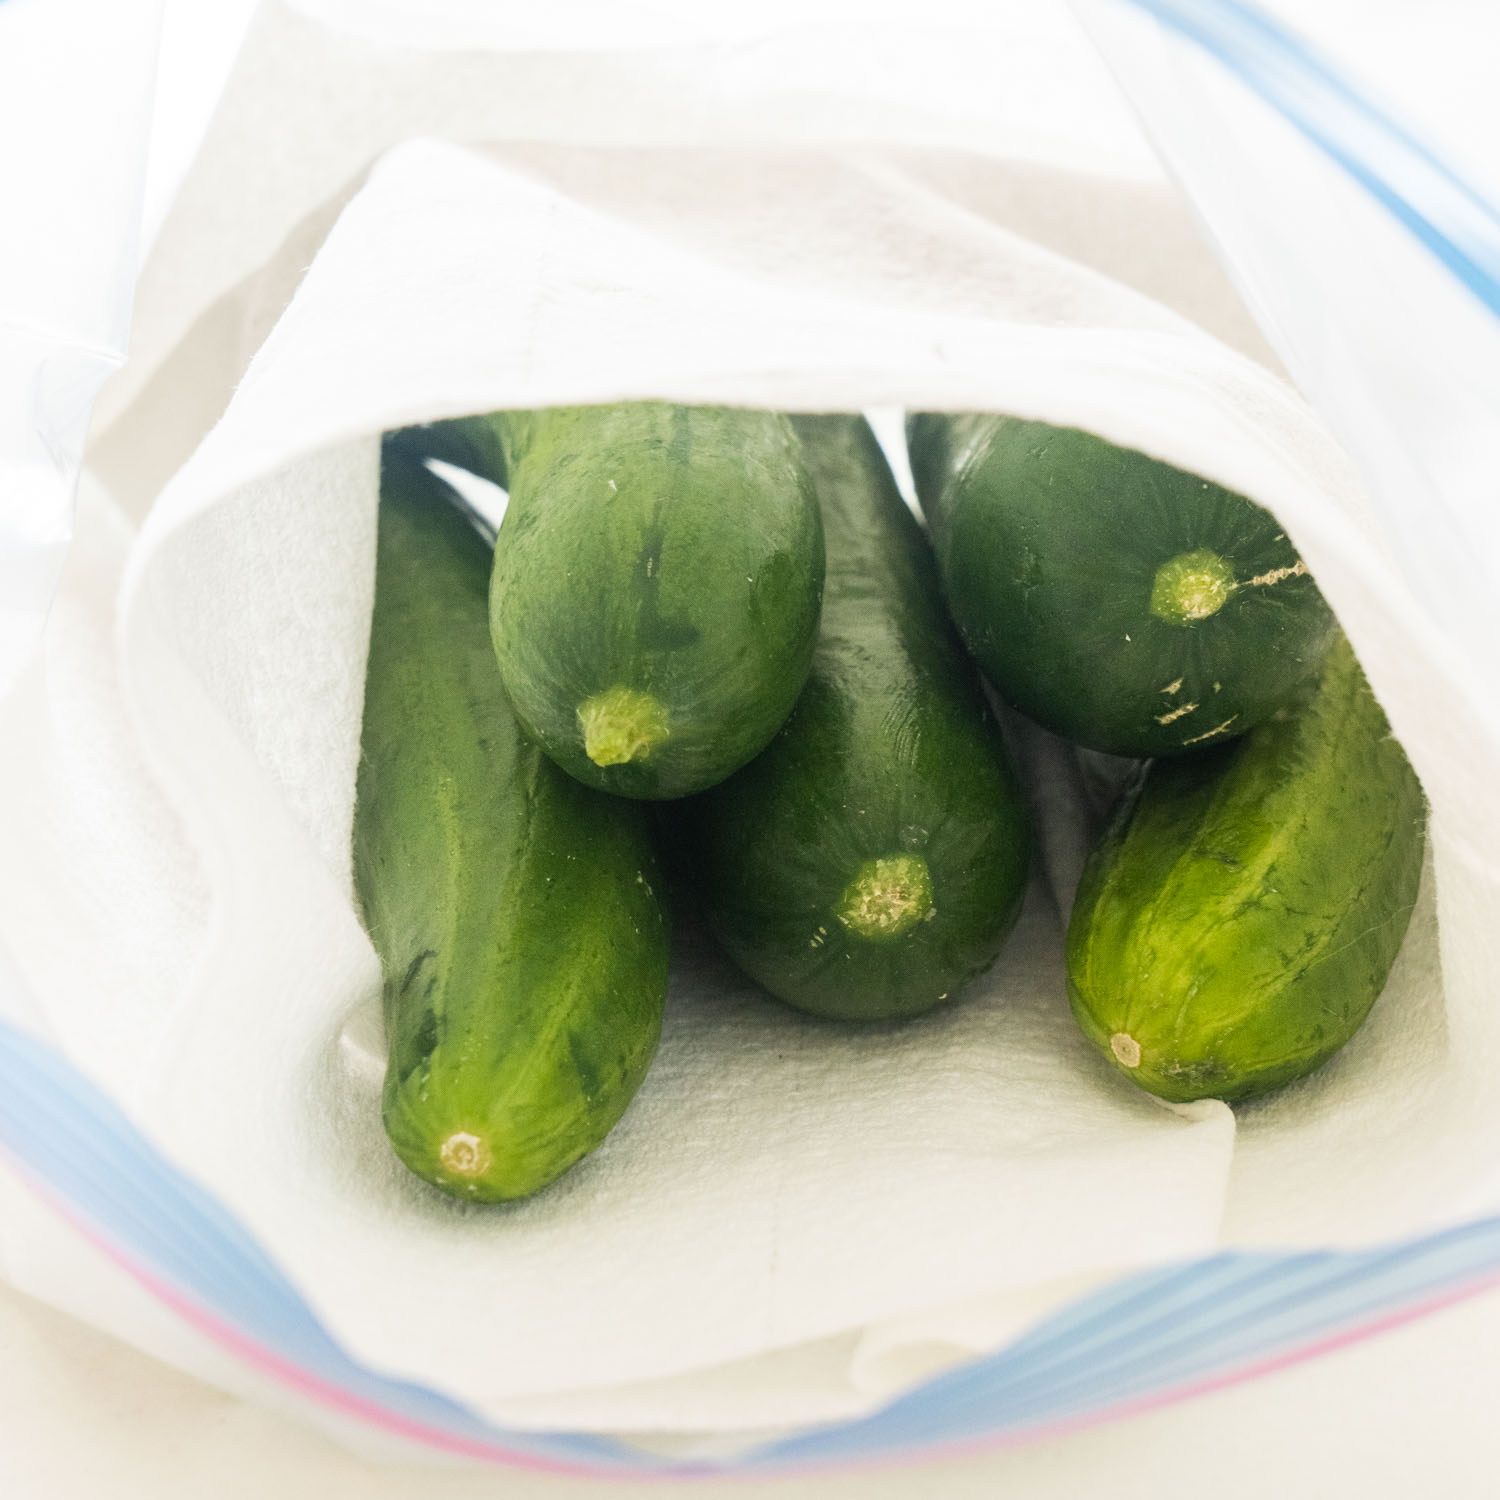 https://brooklynfarmgirl.com/wp-content/uploads/2020/07/How-to-Store-Cucumbers-to-Last-for-Weeks-Featured-Image.jpg